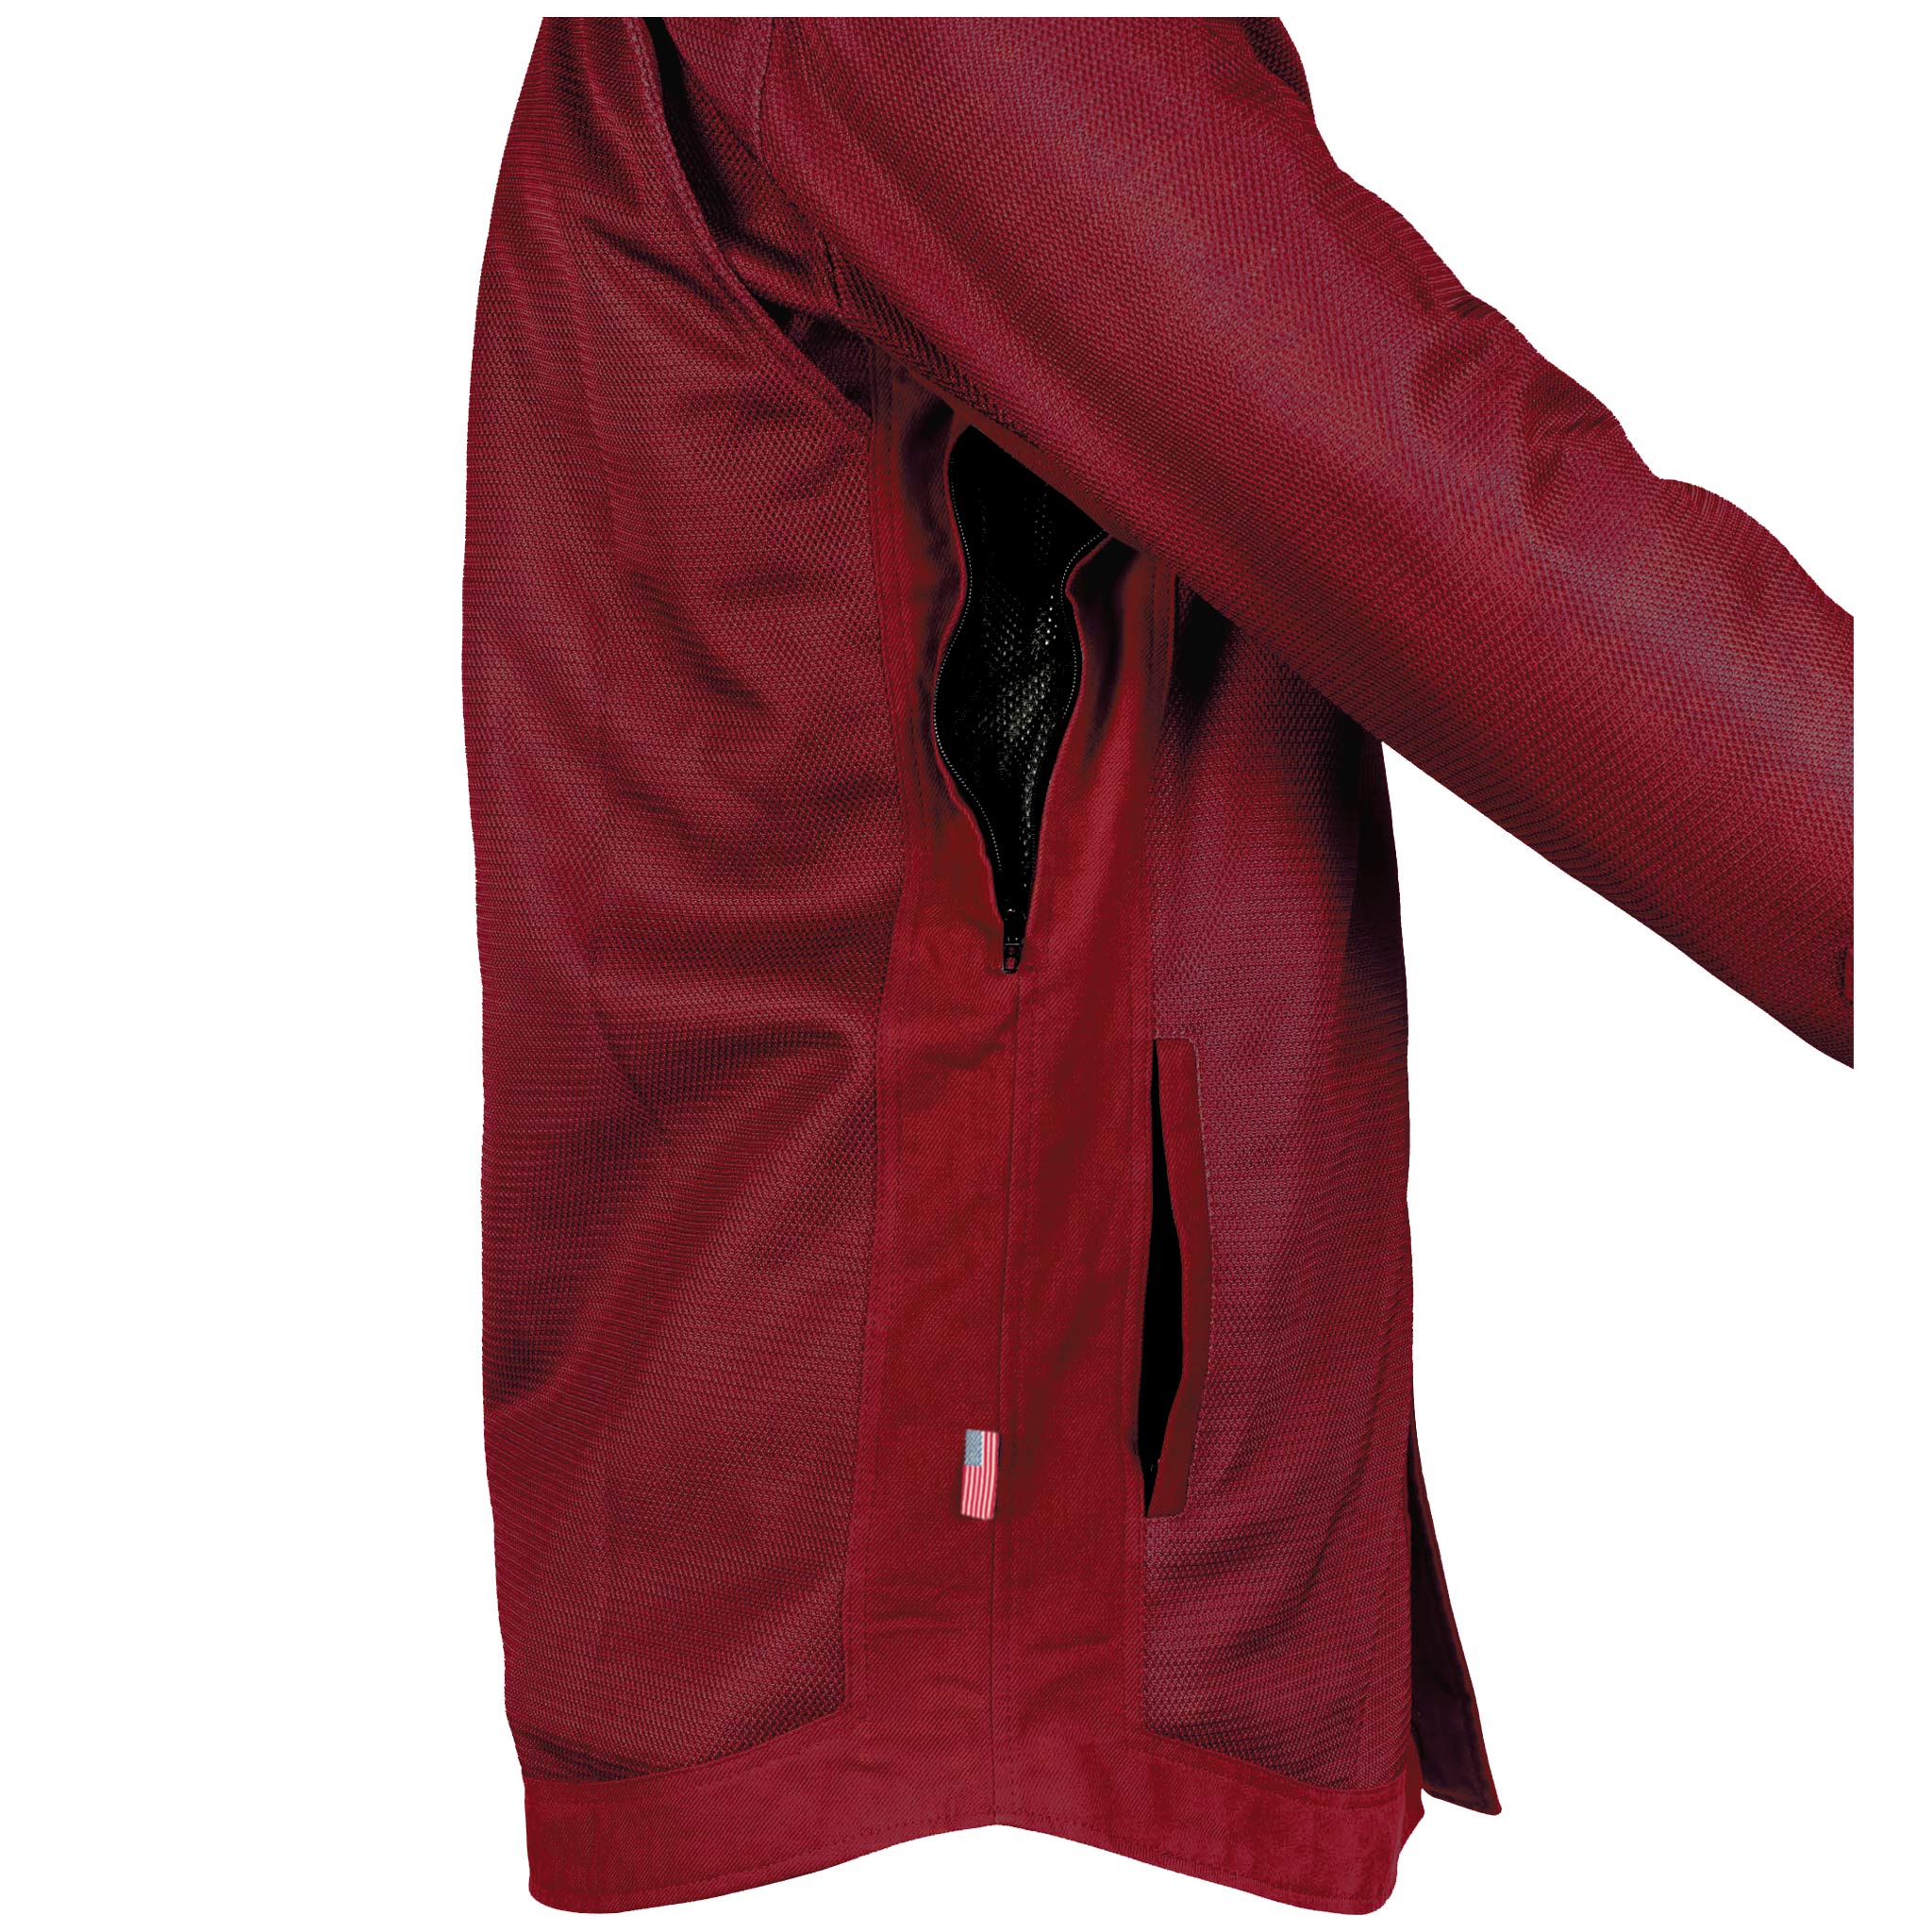 Summer-Mesh-Shirt-for-Men-in-Red-Maroon-Solid-Right-Sleeve-FWD